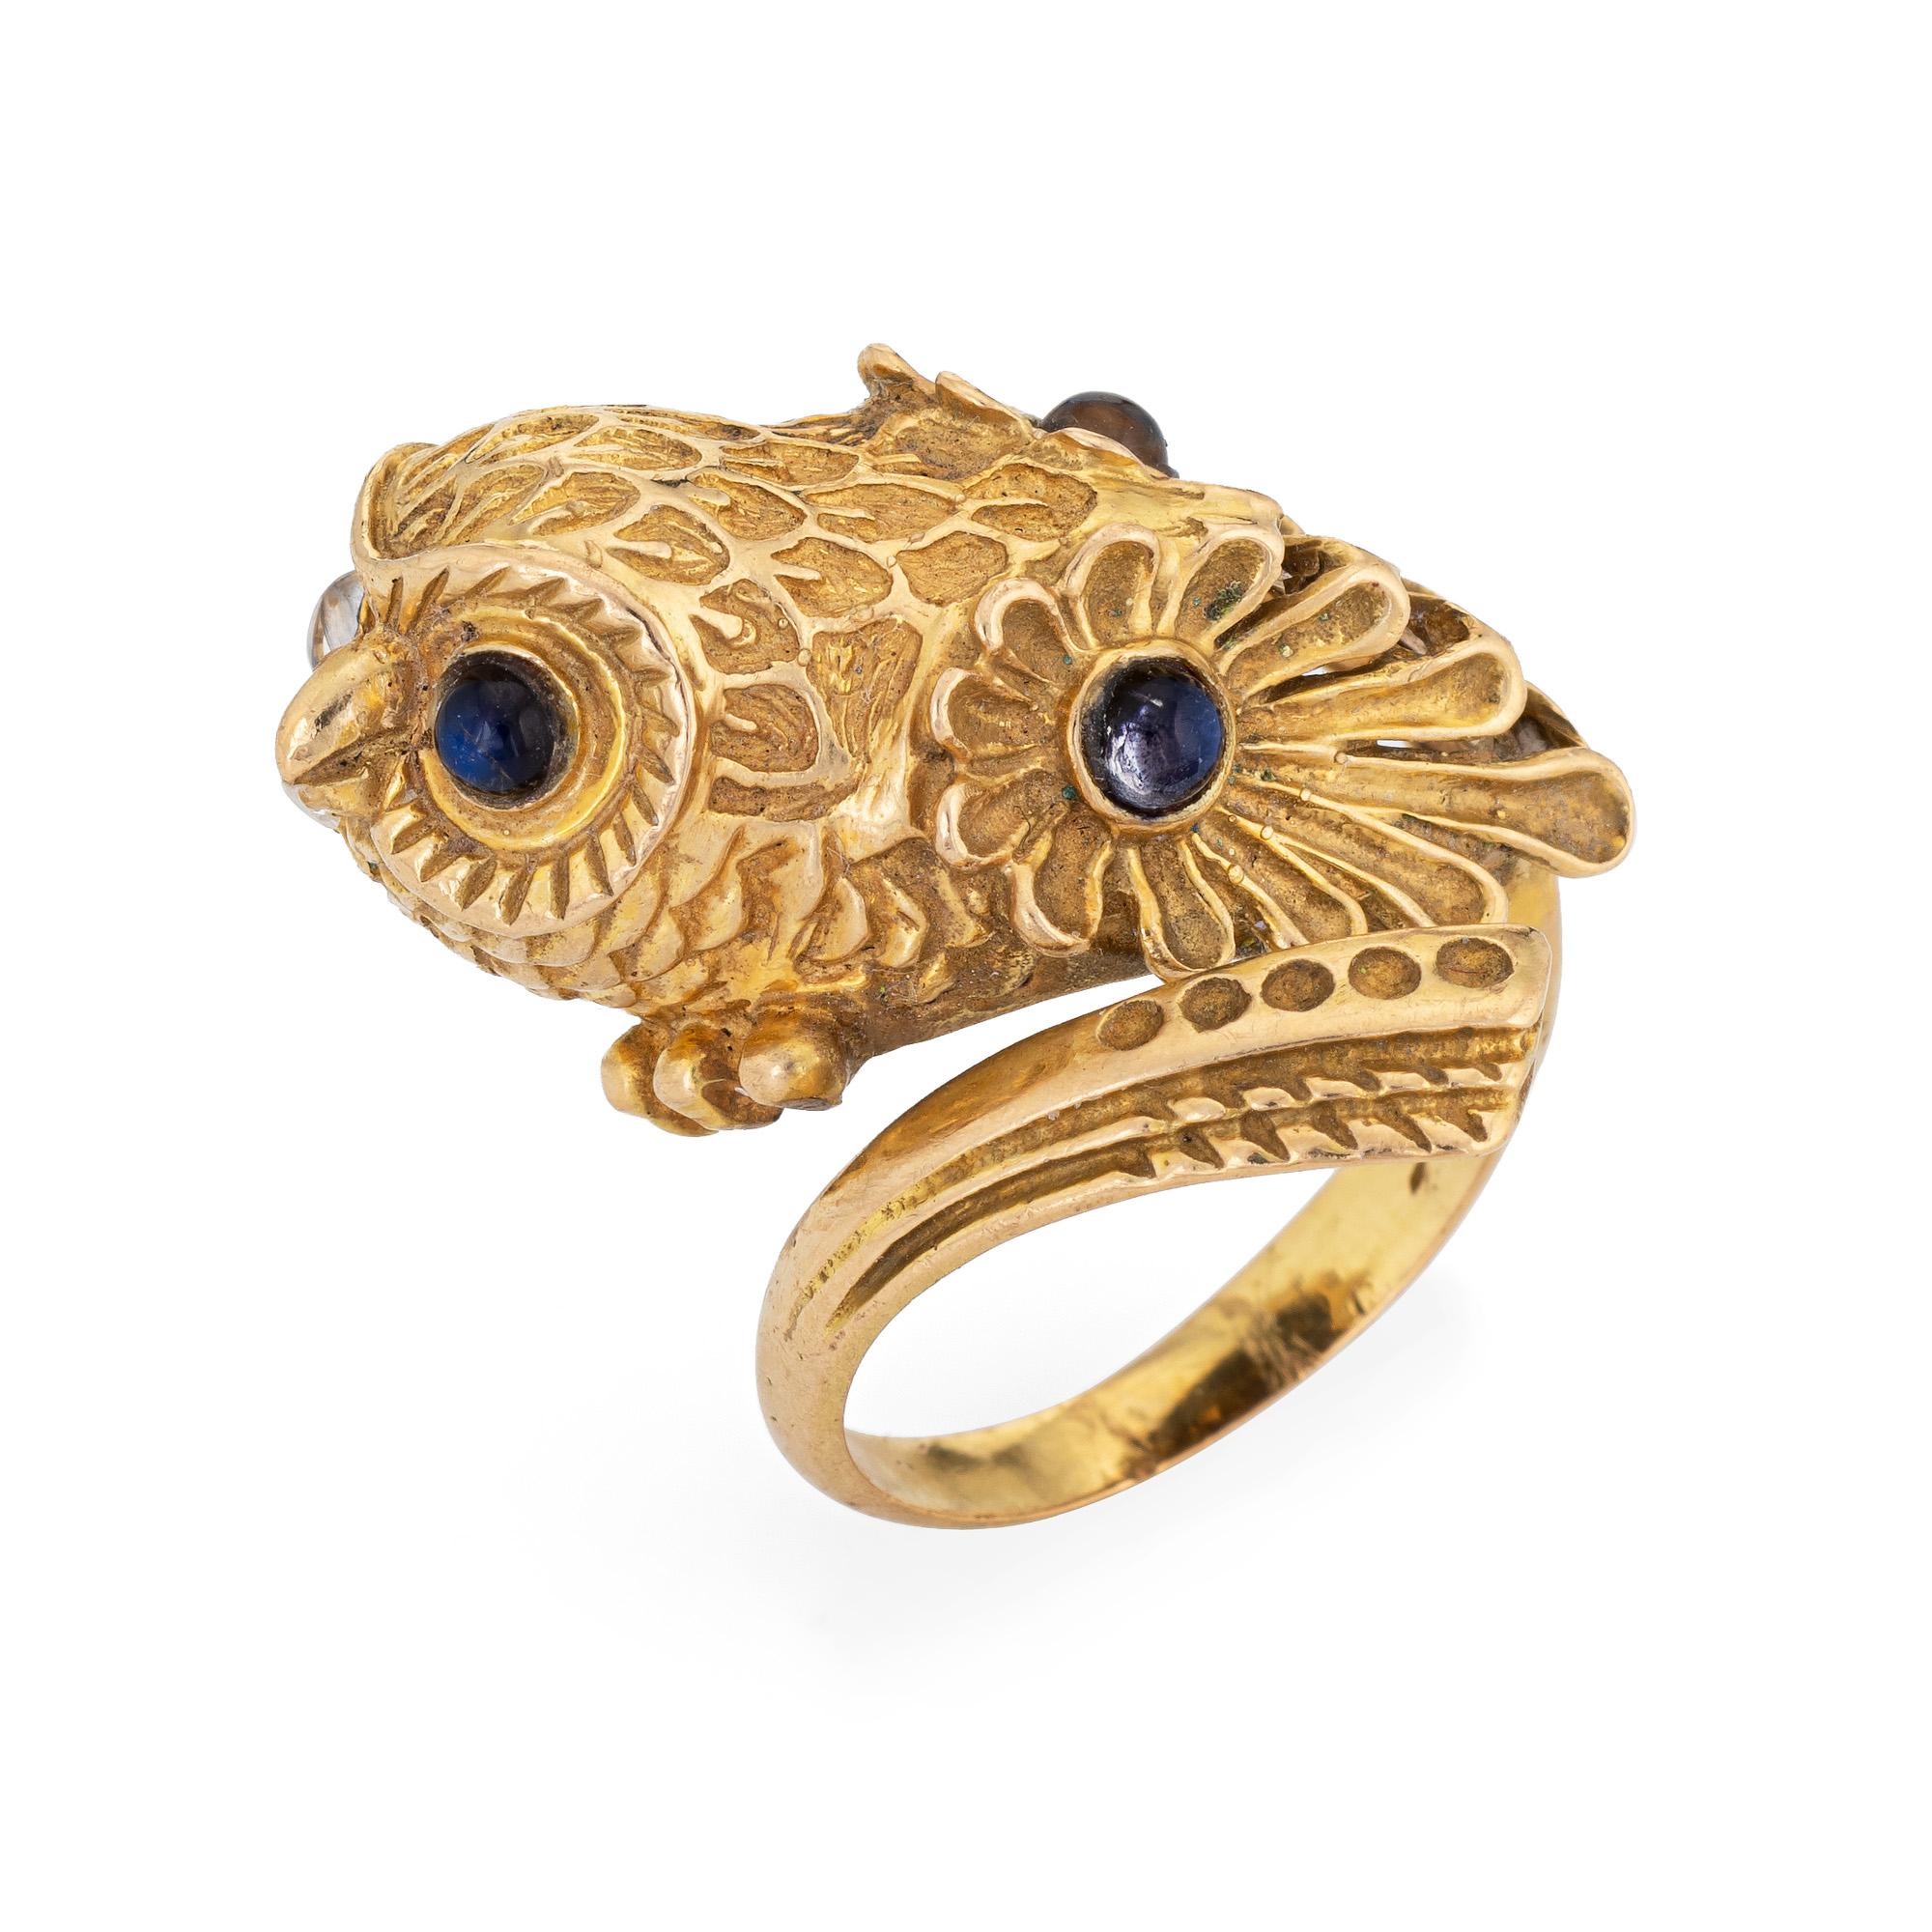 Distinct owl ring set with blue sapphire eyes crafted in 18 karat yellow gold (circa 1960s). 

Cabochon cut sapphires each measure 2mm (4 total). The sapphires are in very good condition and free of cracks or chips. 

The beautifully detailed owl is